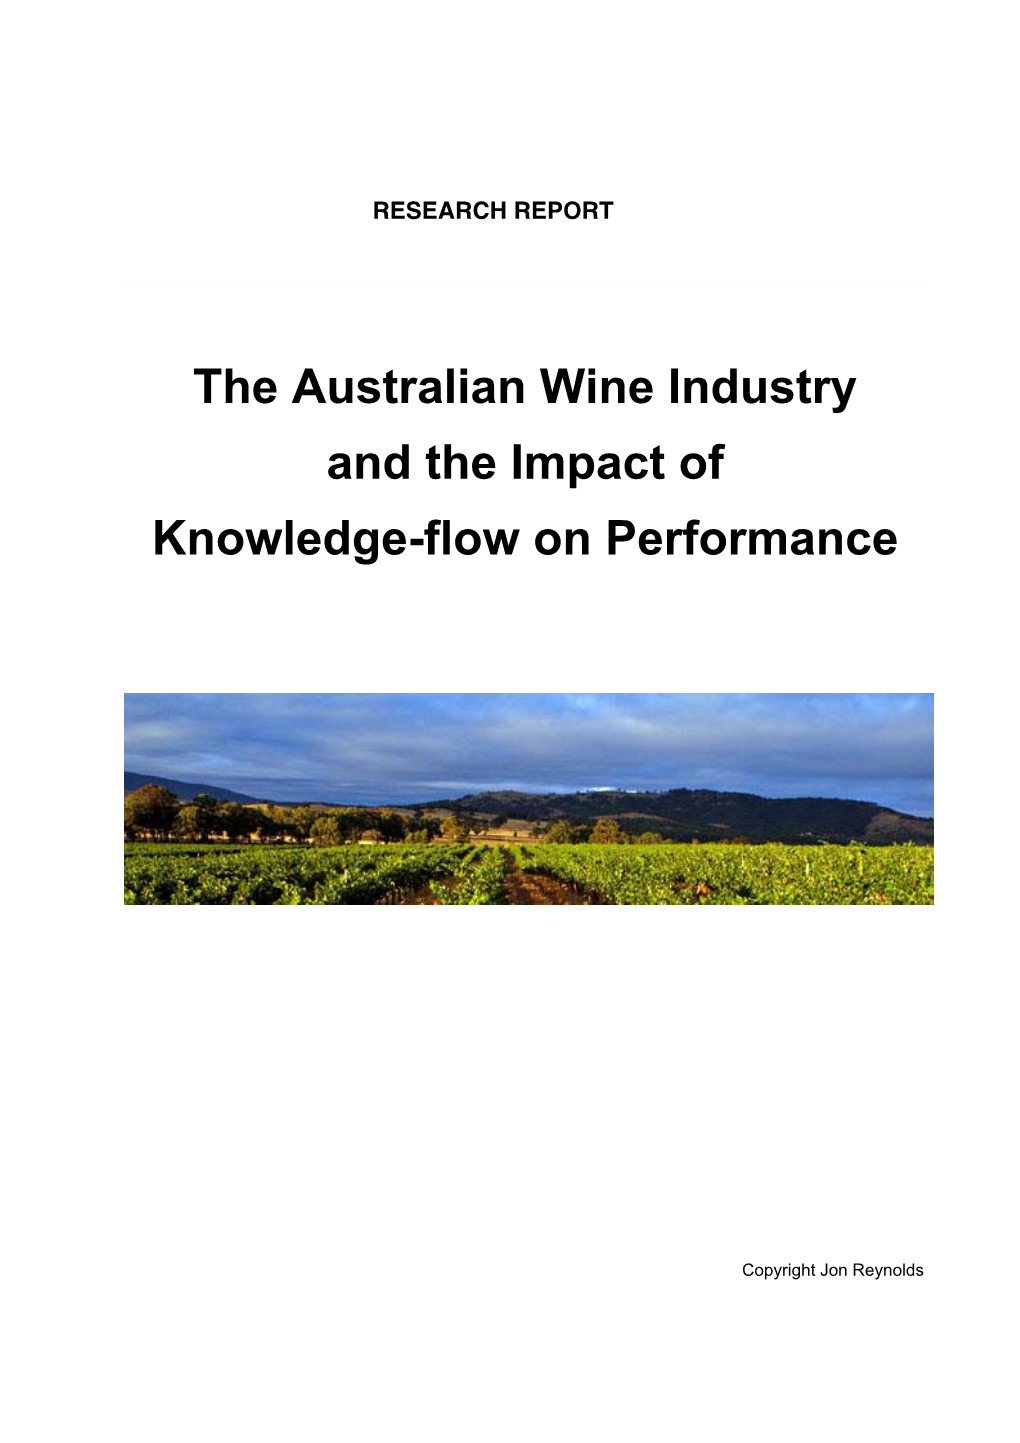 The Australian Wine Industry and the Impact of Knowledge-Flow On